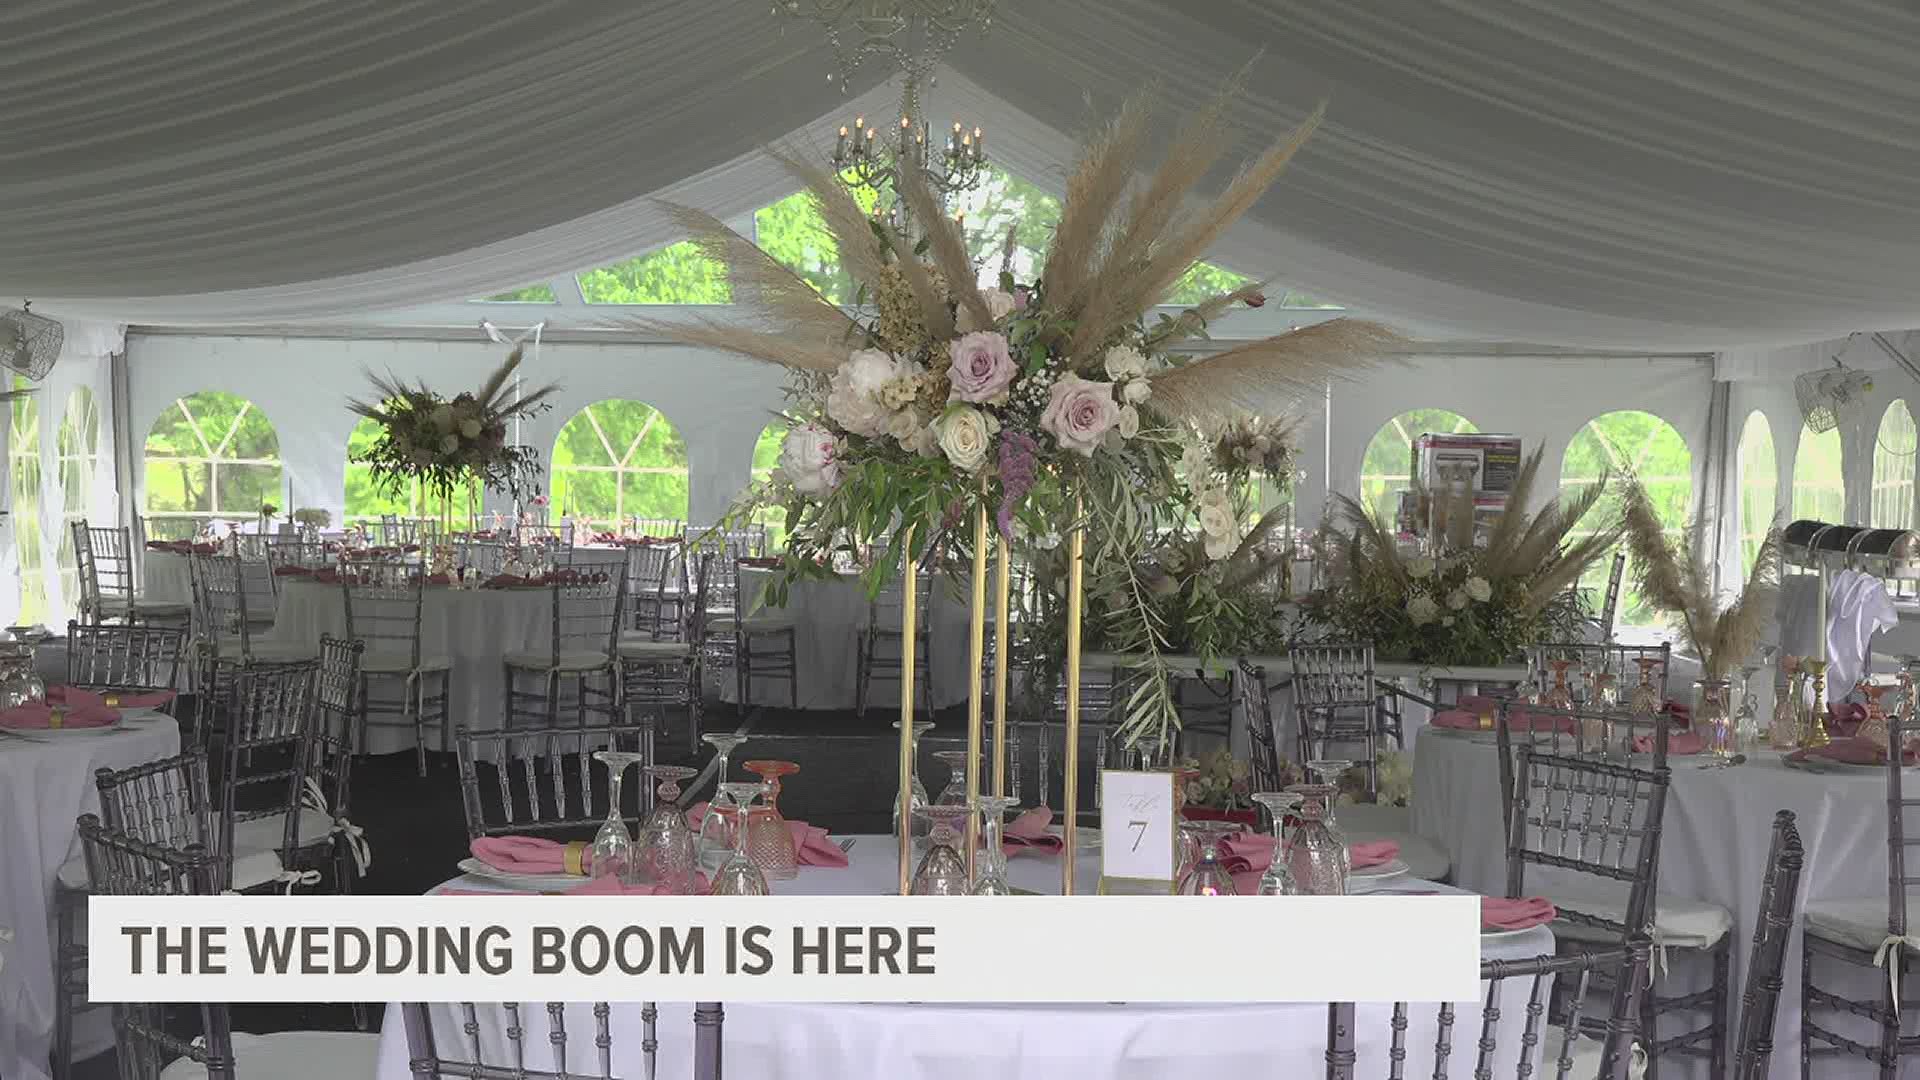 Central PA is seeing a wedding boom as vendors scramble to keep up